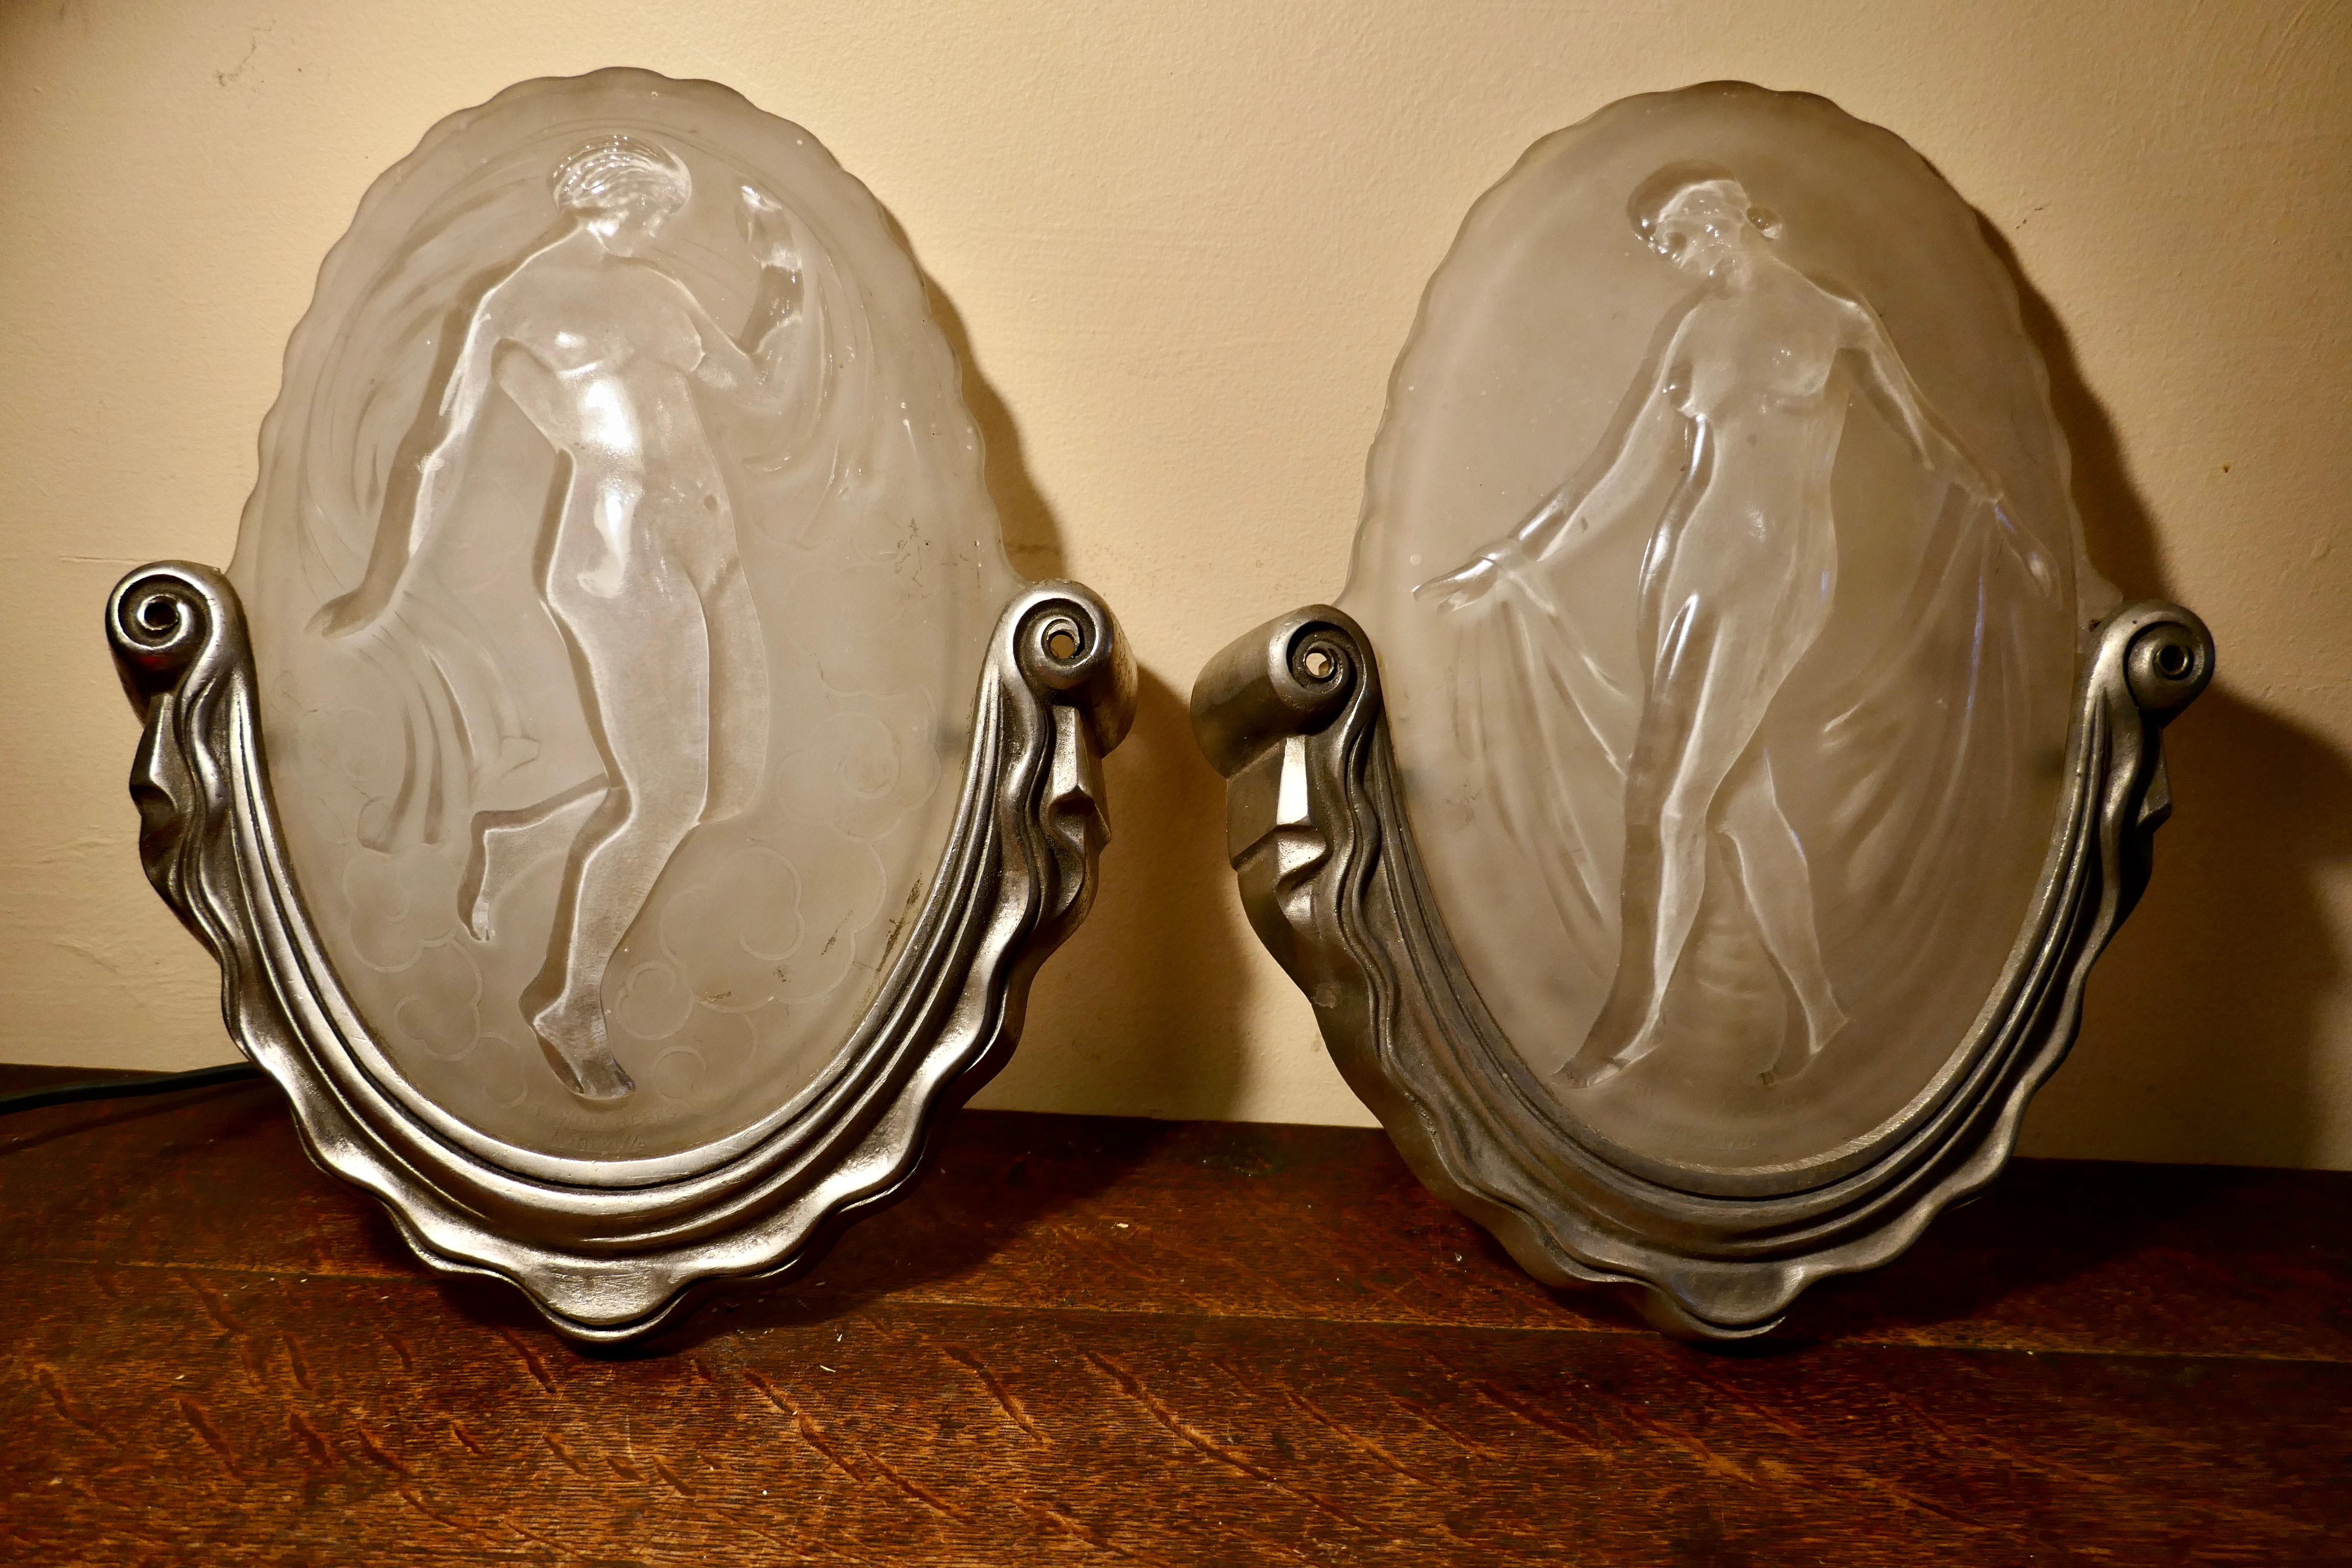 Pair of Art Deco Opaque Glass Light Shades by Muller Freres Luneville

A rare pair of Opaque glass lamp shades, with beautifully detailed dancing nudes both shades  are signed by Muller Brothers of Luneville, they are set in the original pewter